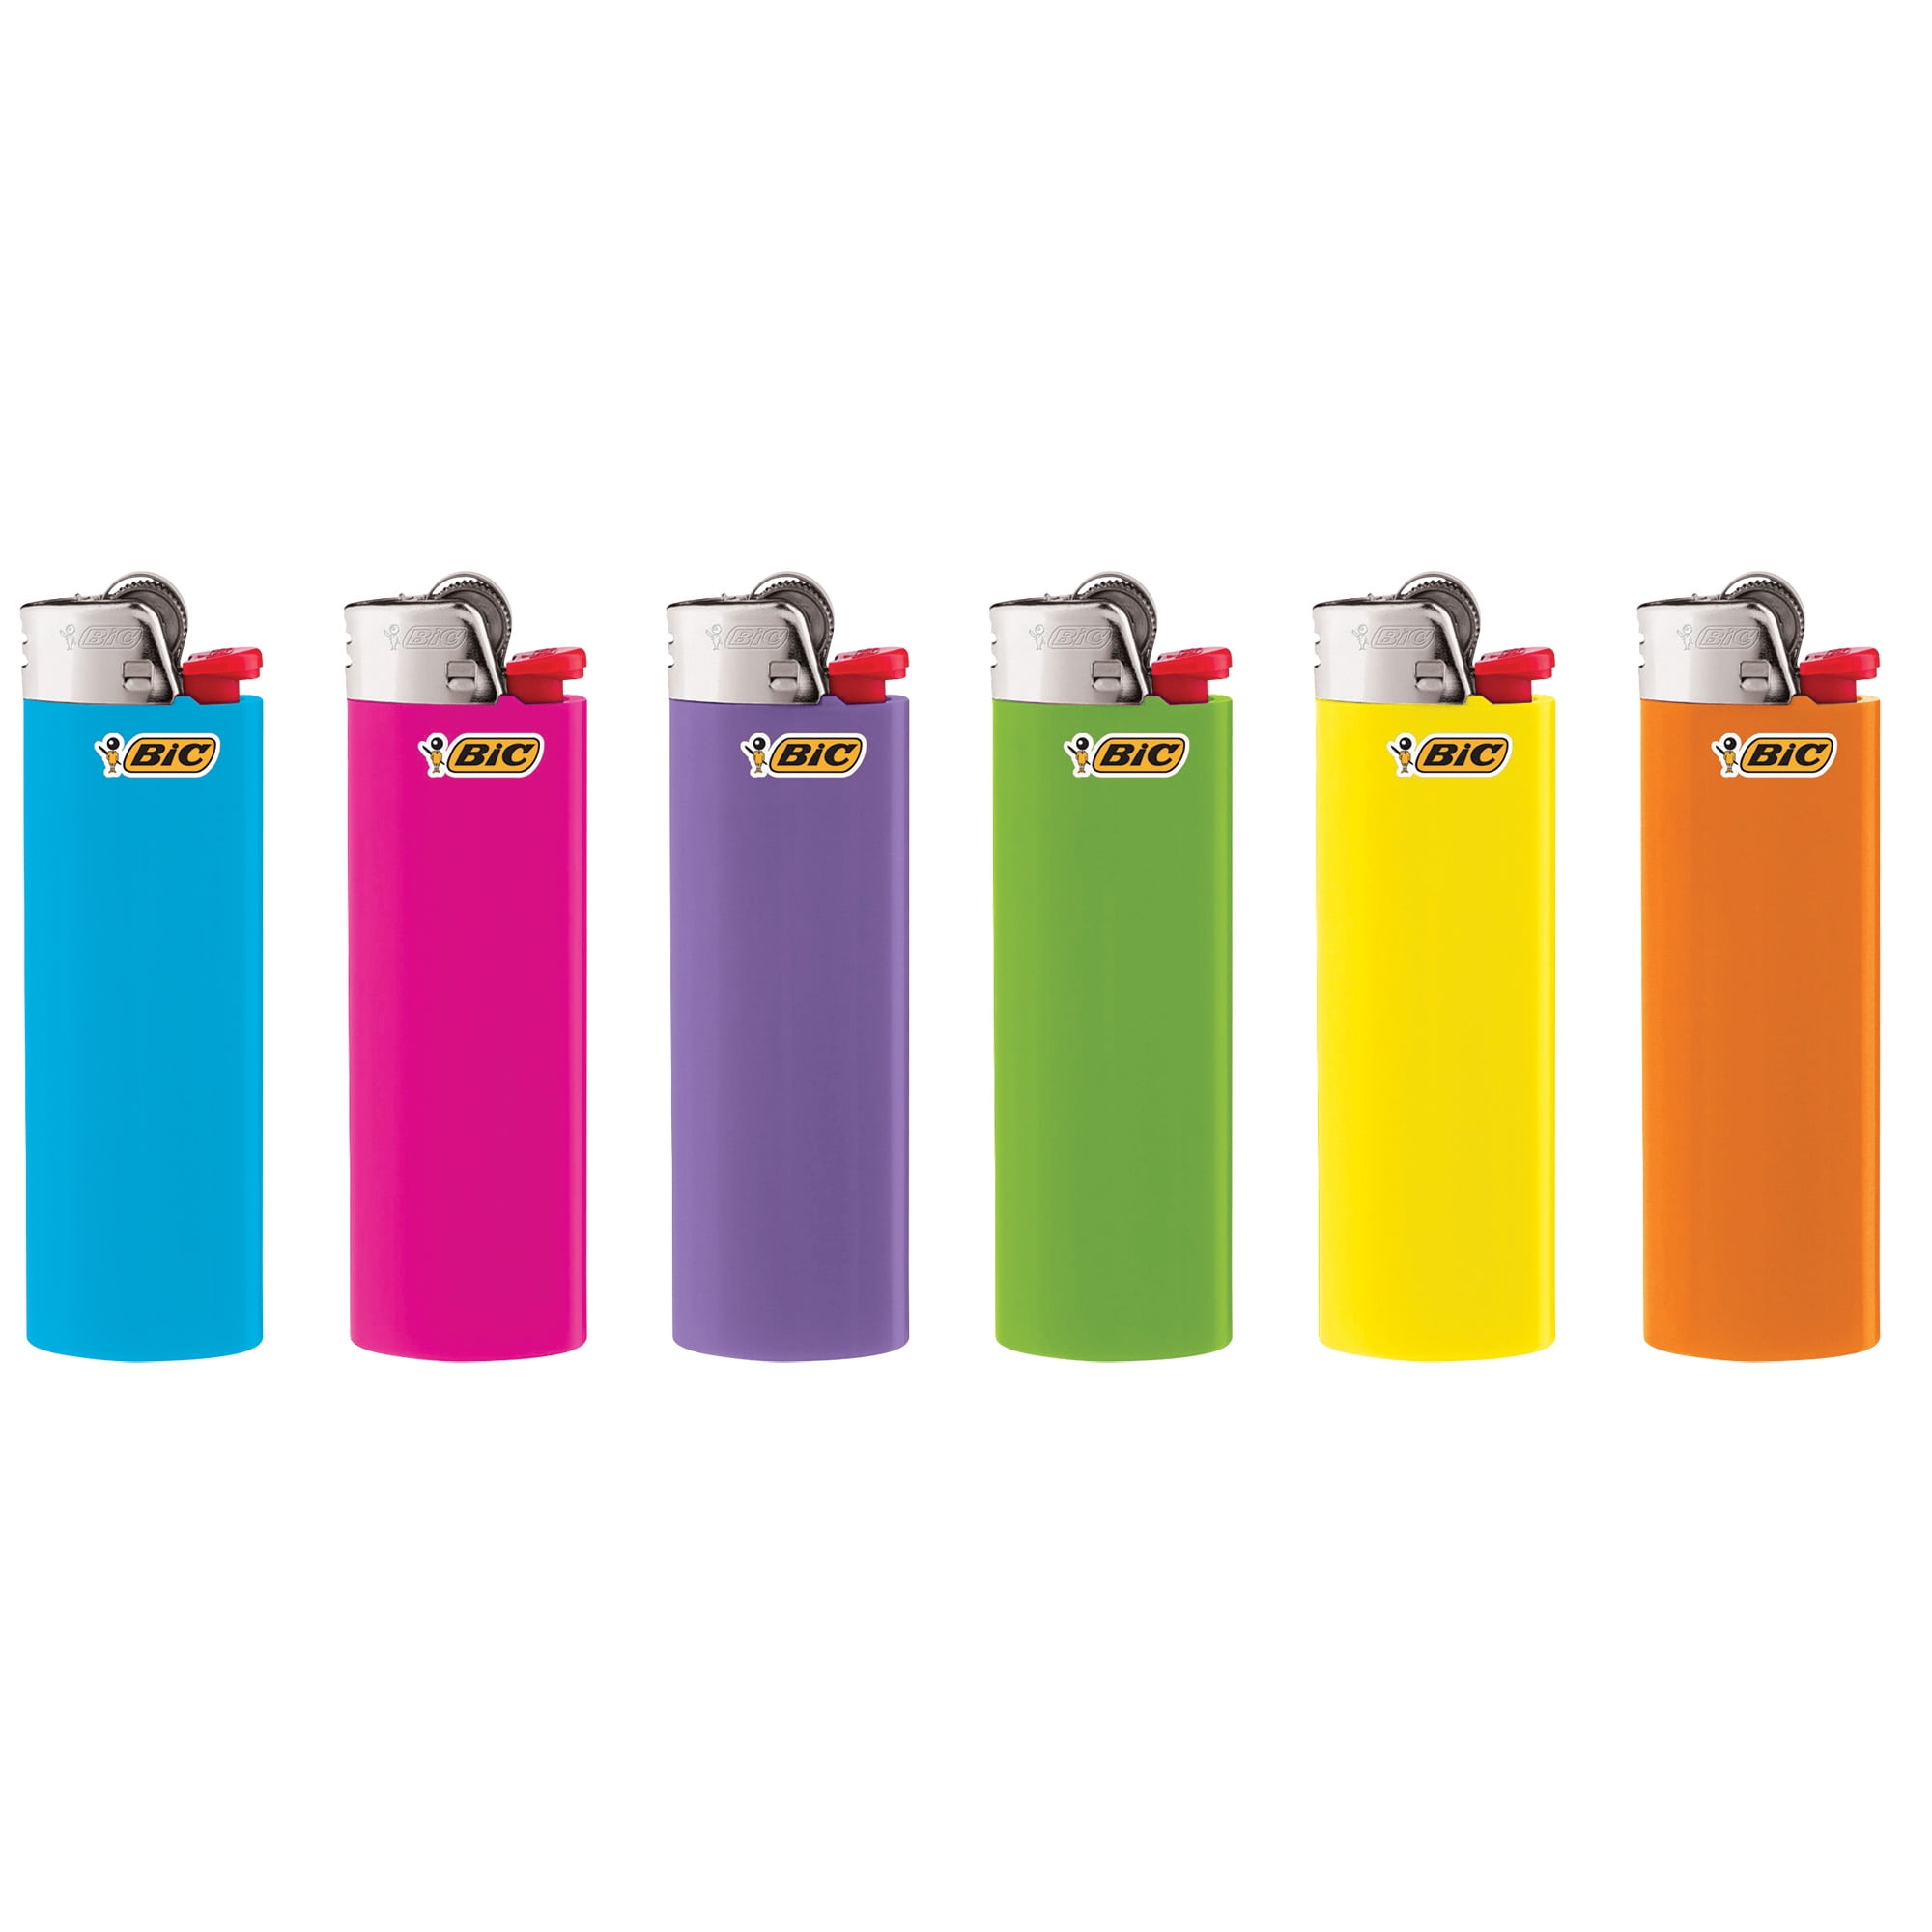 BIC Lighter, Fashion Assorted Colors, 10-Pack Pocket Lighter (Packaging May Vary) -